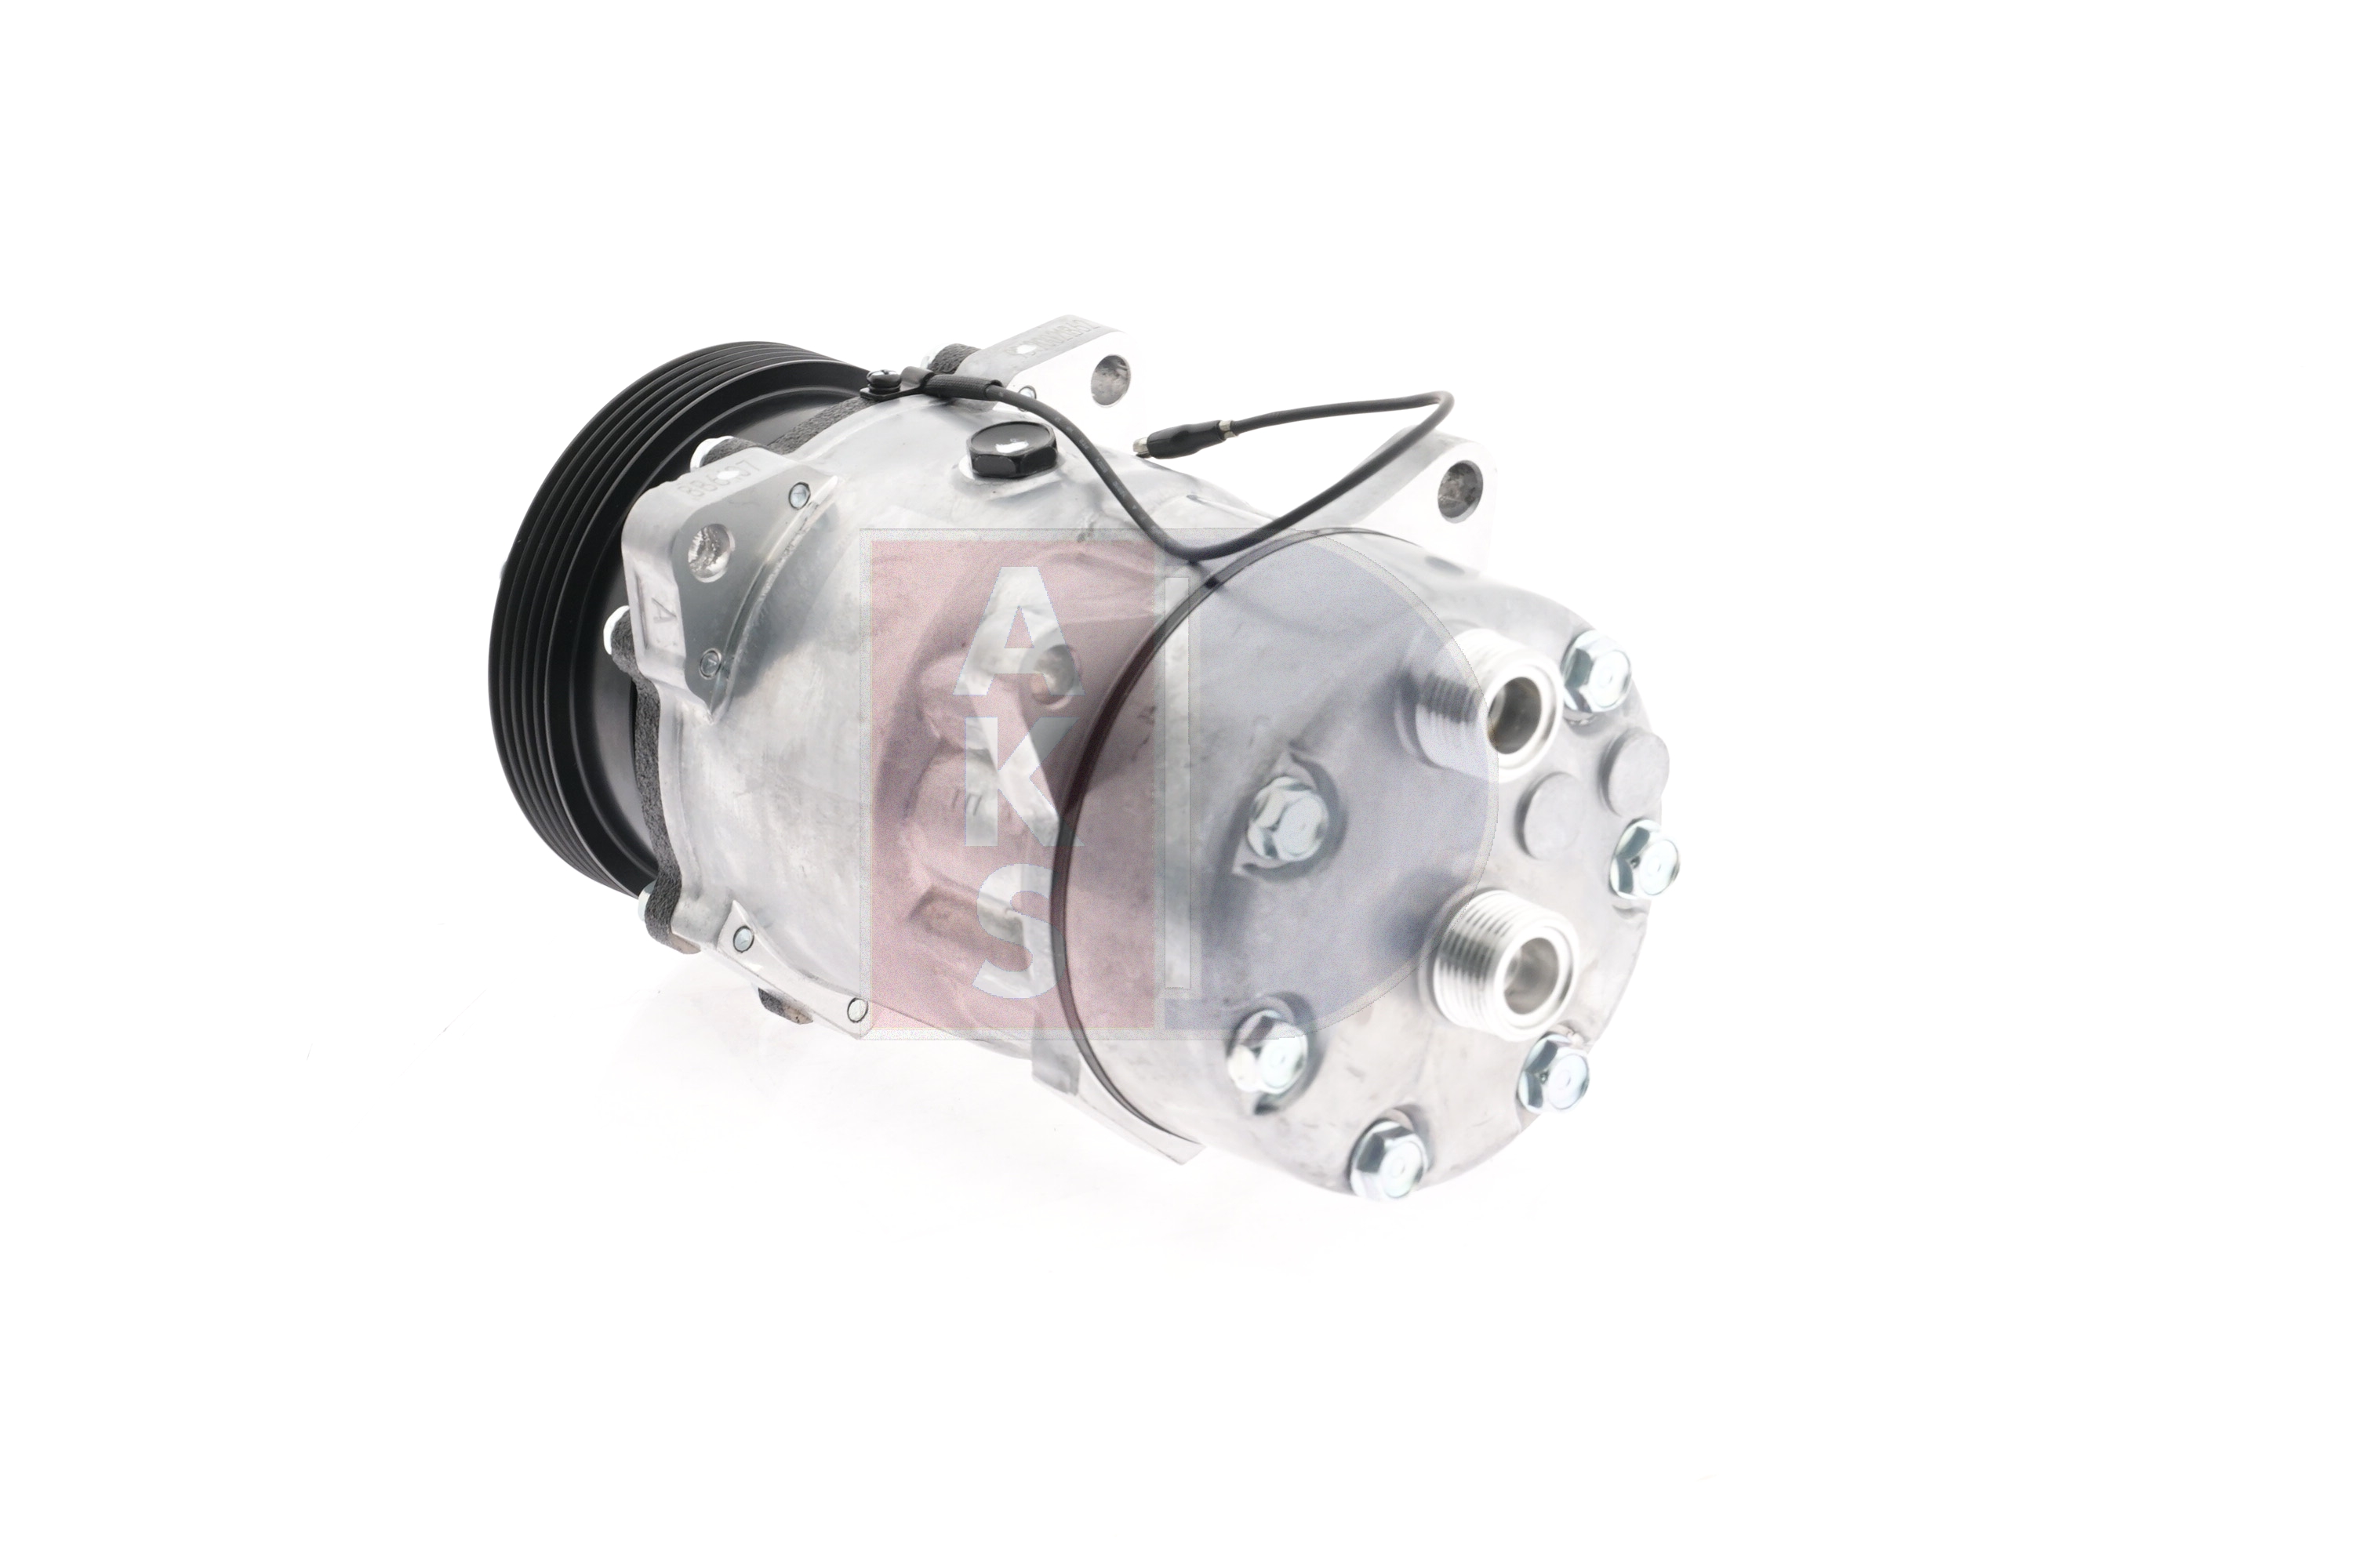 AKS DASIS 851372N Air conditioning compressor PEUGEOT experience and price